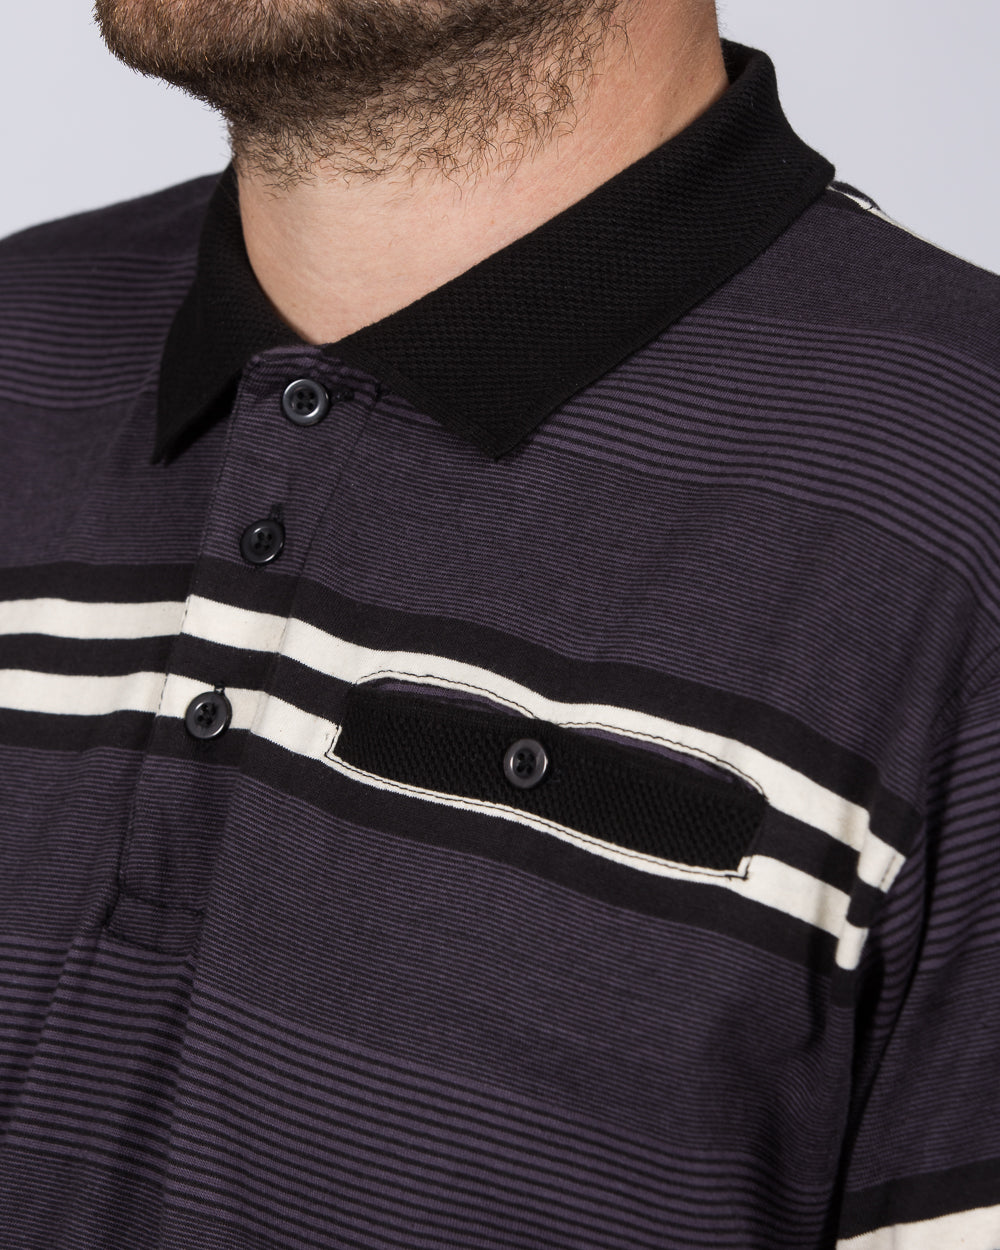 2t Regular Fit Tall Striped Polo Shirt (charcoal)